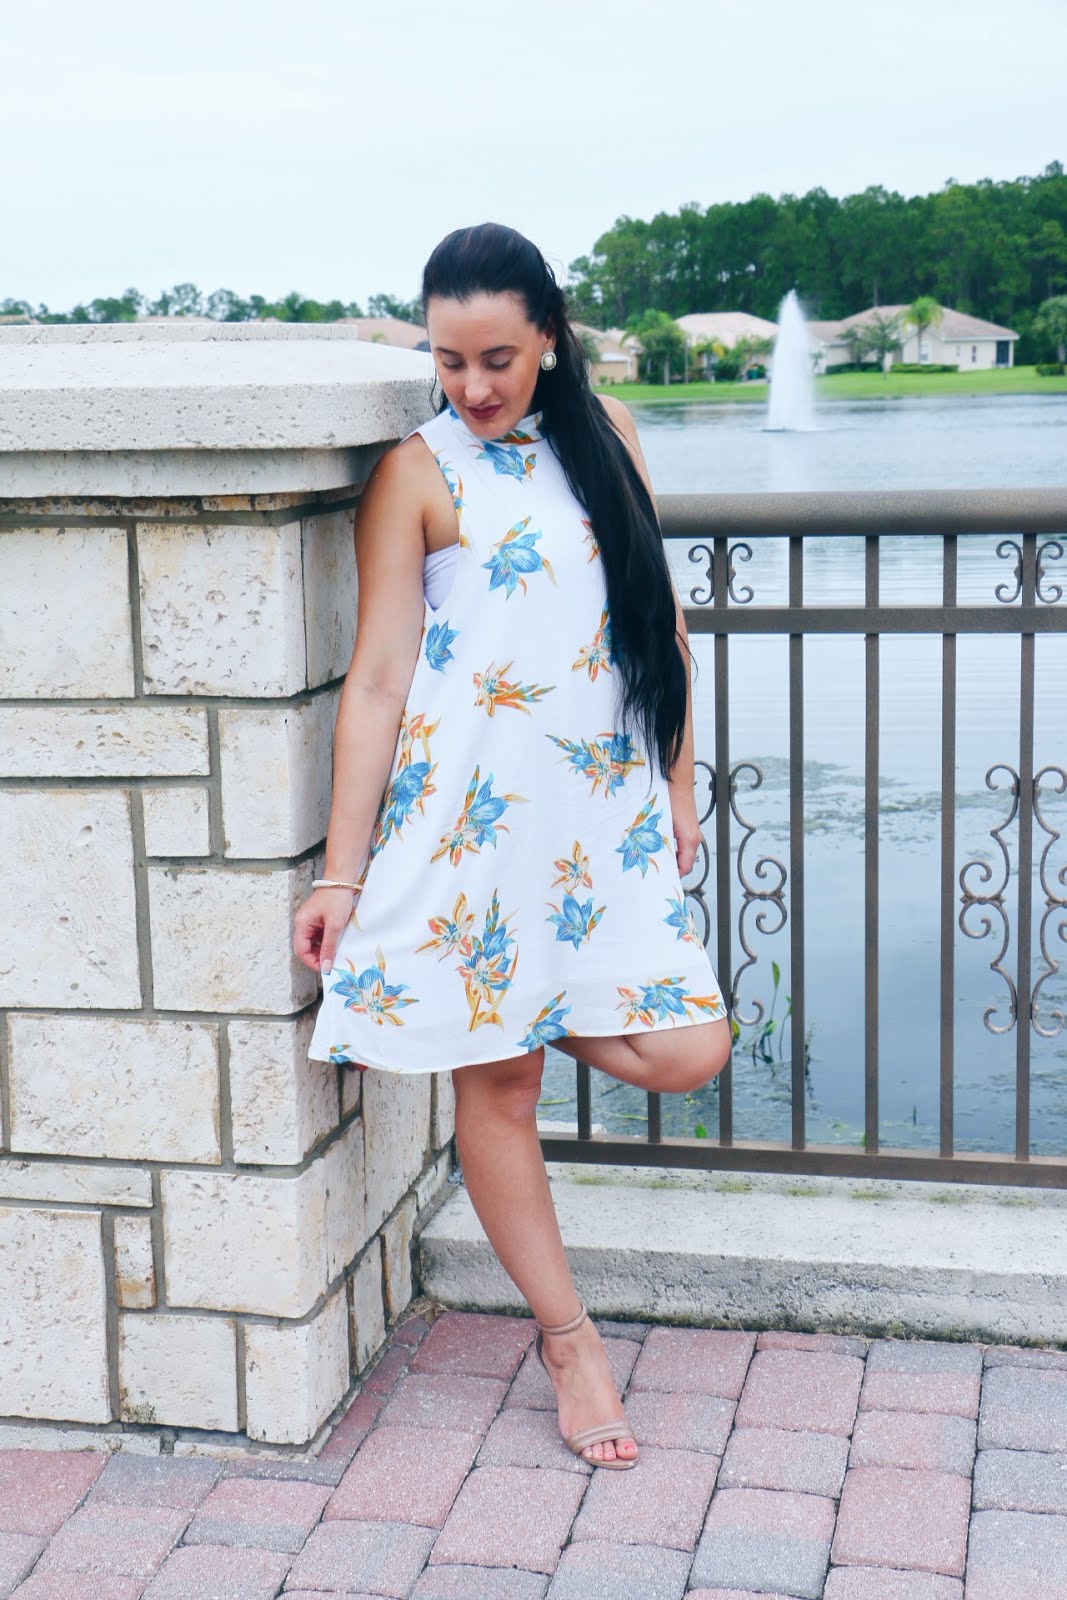 Follow-Your-Dreams-They-Know-The-Way-OOTD-Vivi-Brizuela-PinkOrchidMakeup